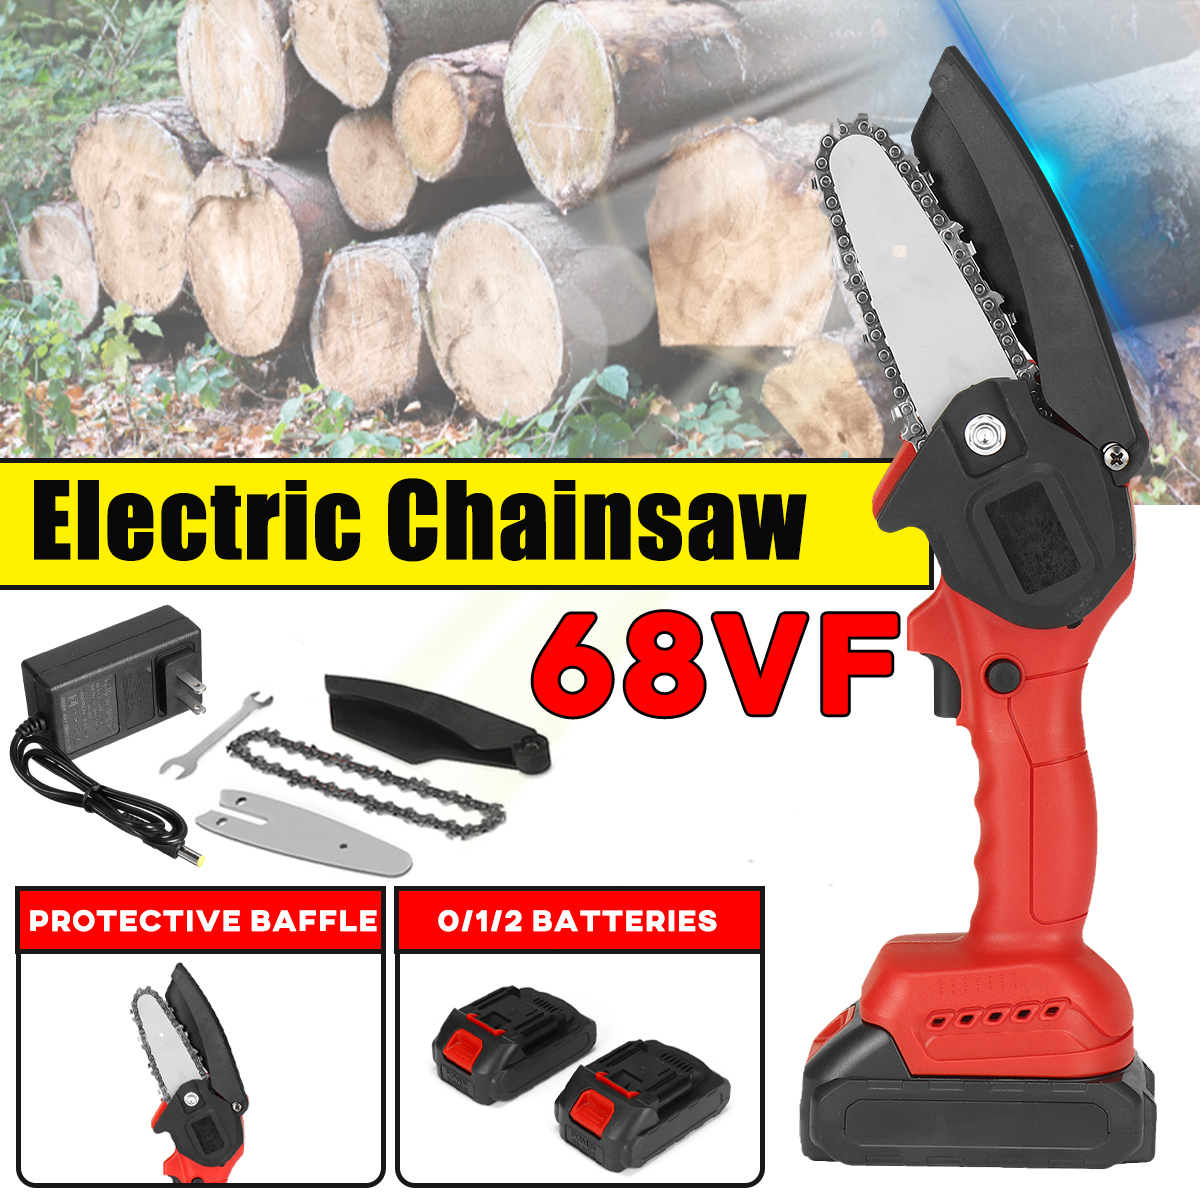 68VF-21V-4-Inch-Electric-Chainsaw-Cordless-Handheld-Rechargeable-Woodworking-Tool-W-None1pc2pcs-Batt-1843119-1